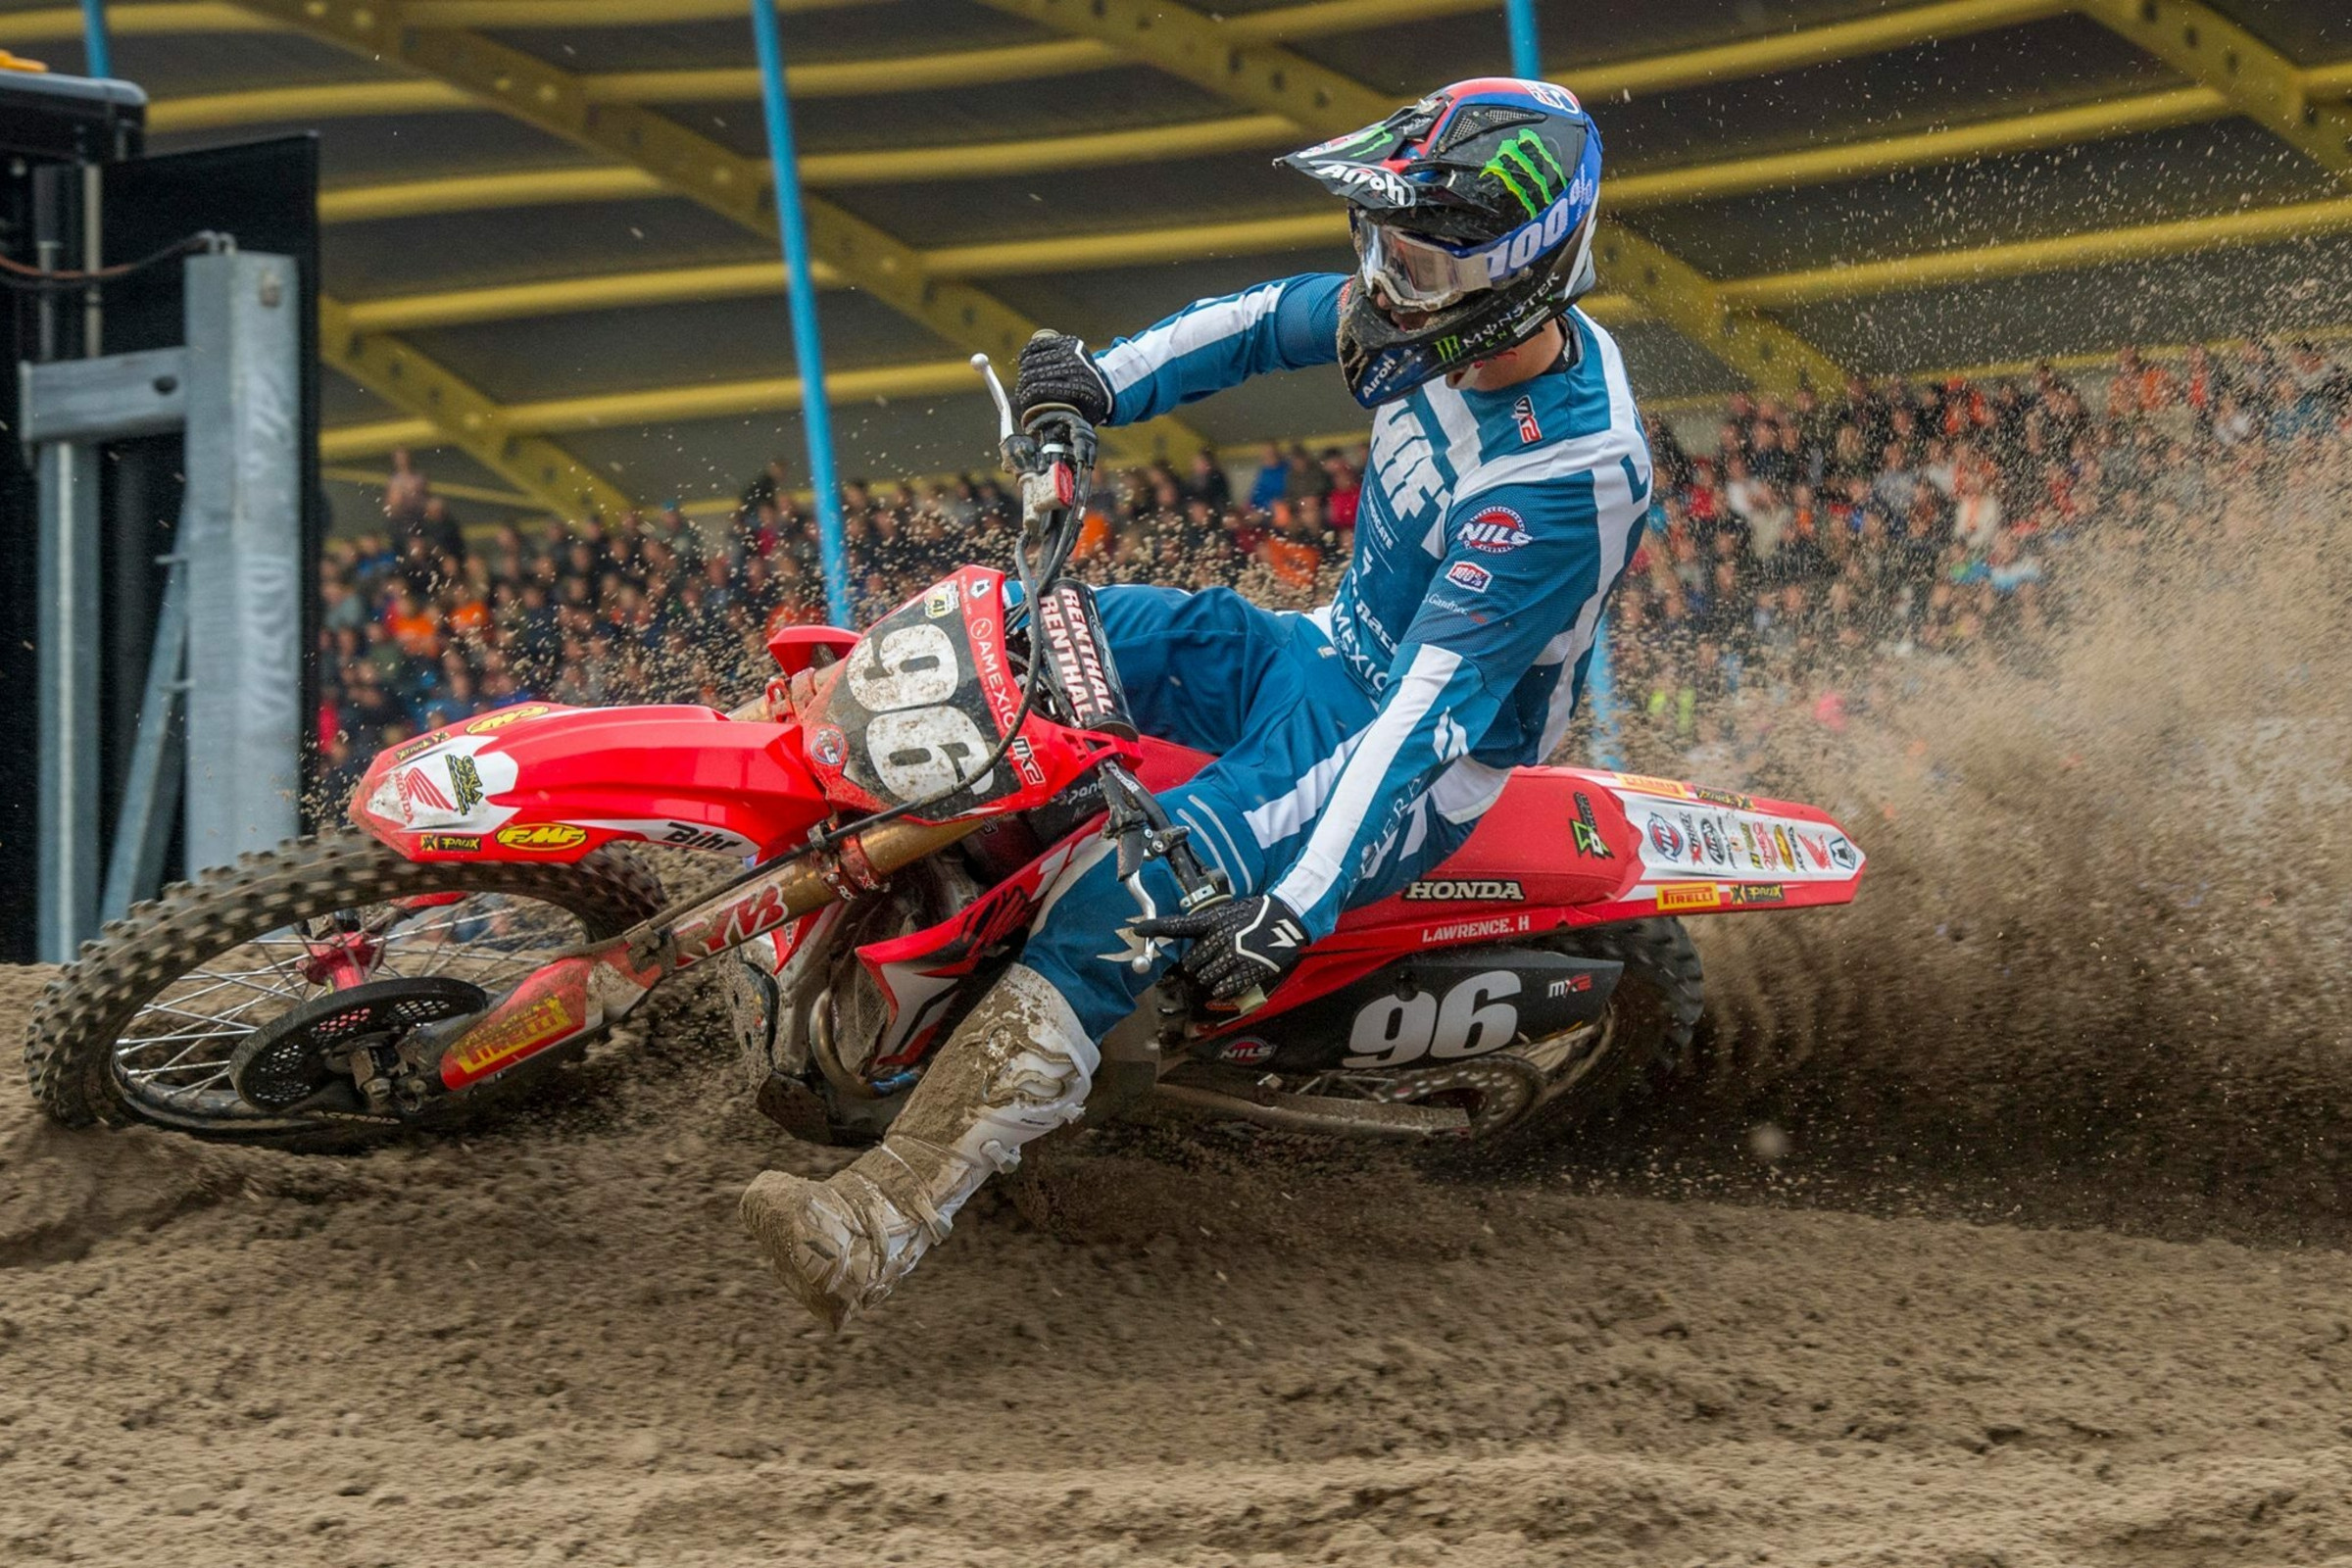 2022 AMA Supercross and Pro Motocross National Numbers